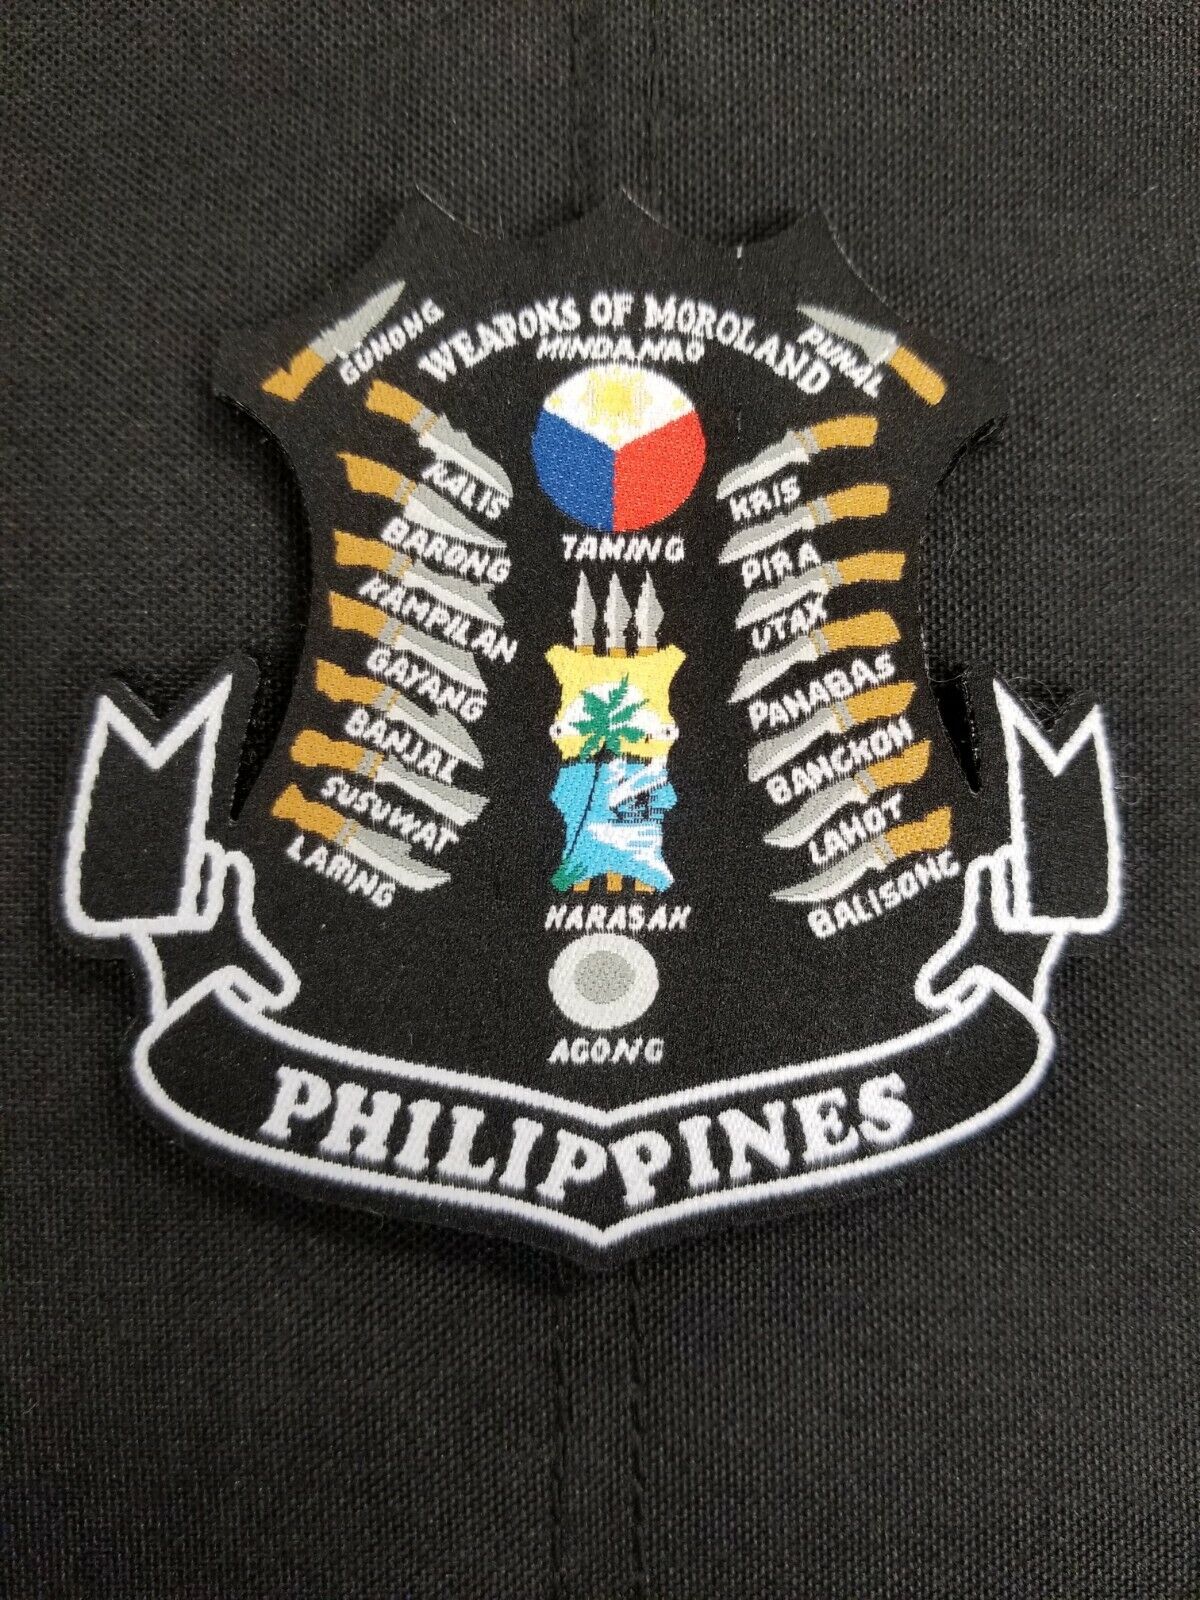 Weapons of Moroland patch Kris Barong Philippines Pinoy Filipino